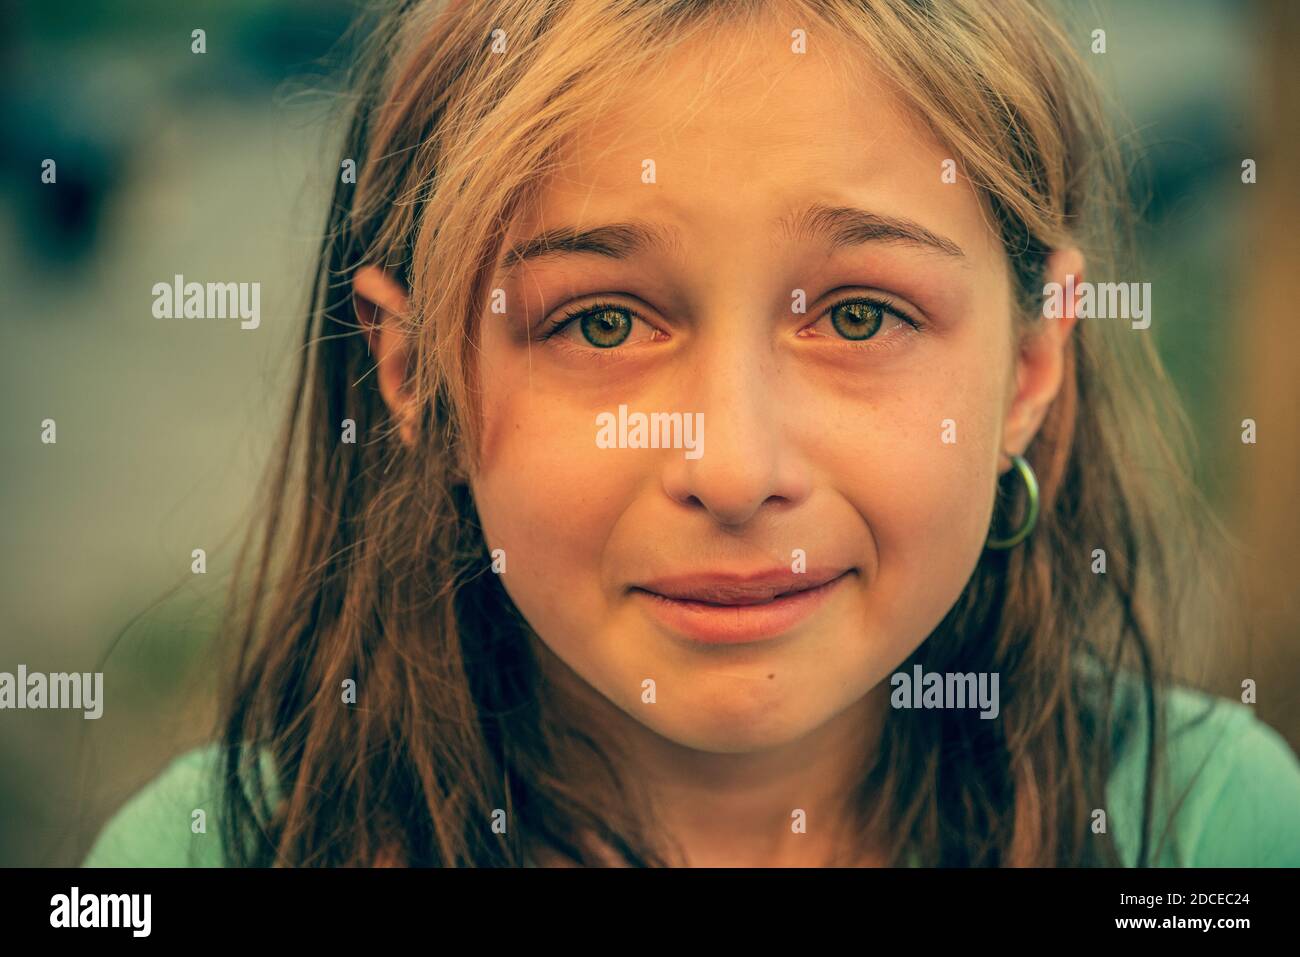 Closeup portrait of young crying girl with tears. Teenage girl ...